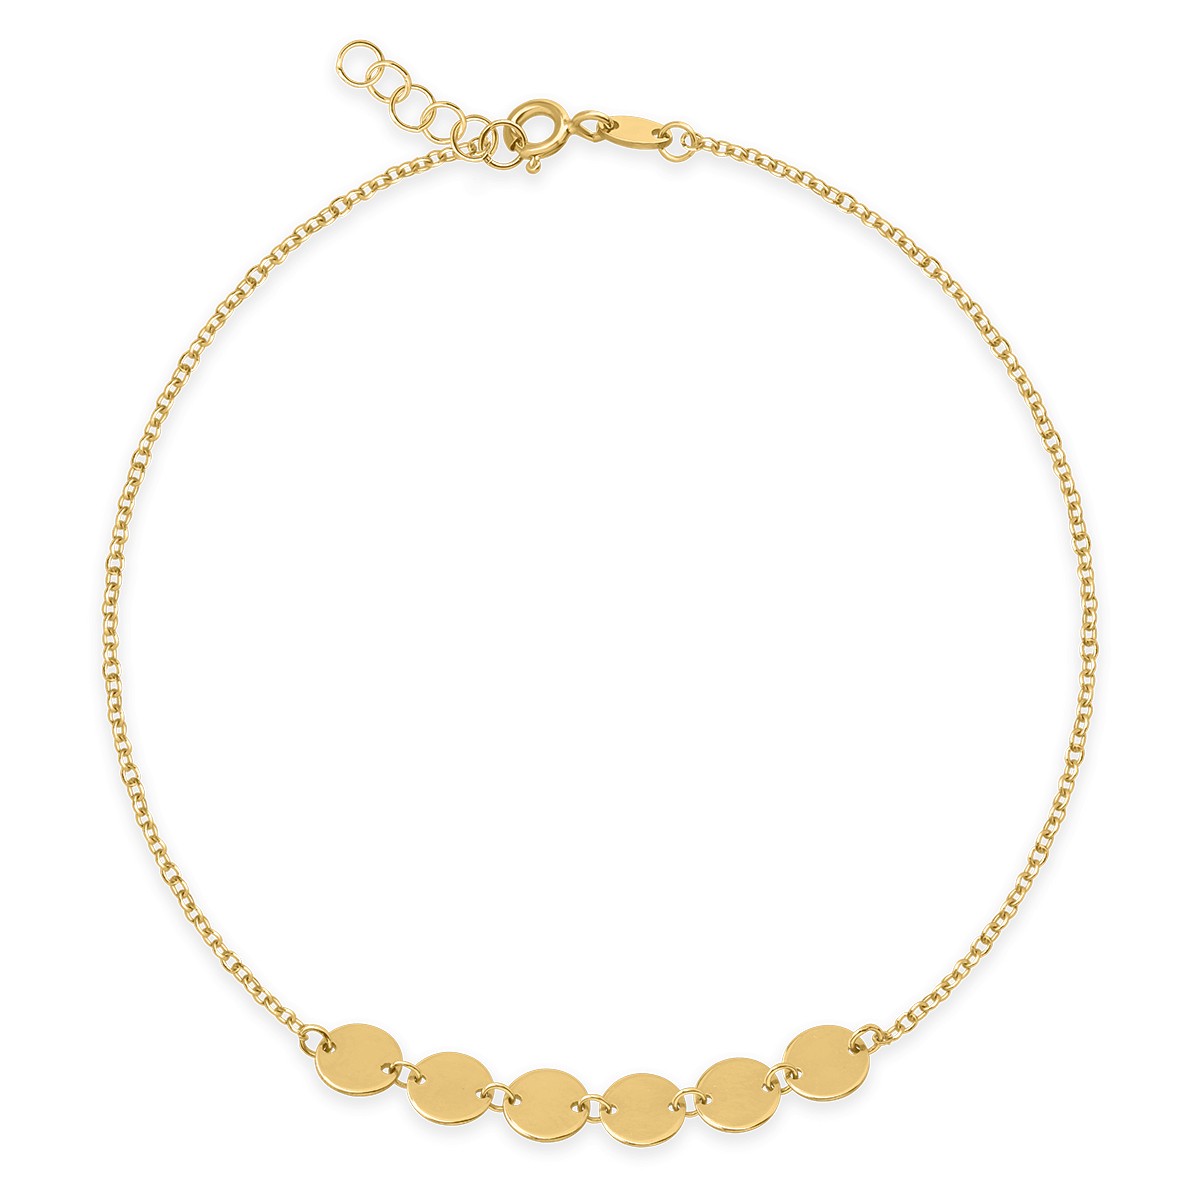 14K yellow gold bracelet with coins